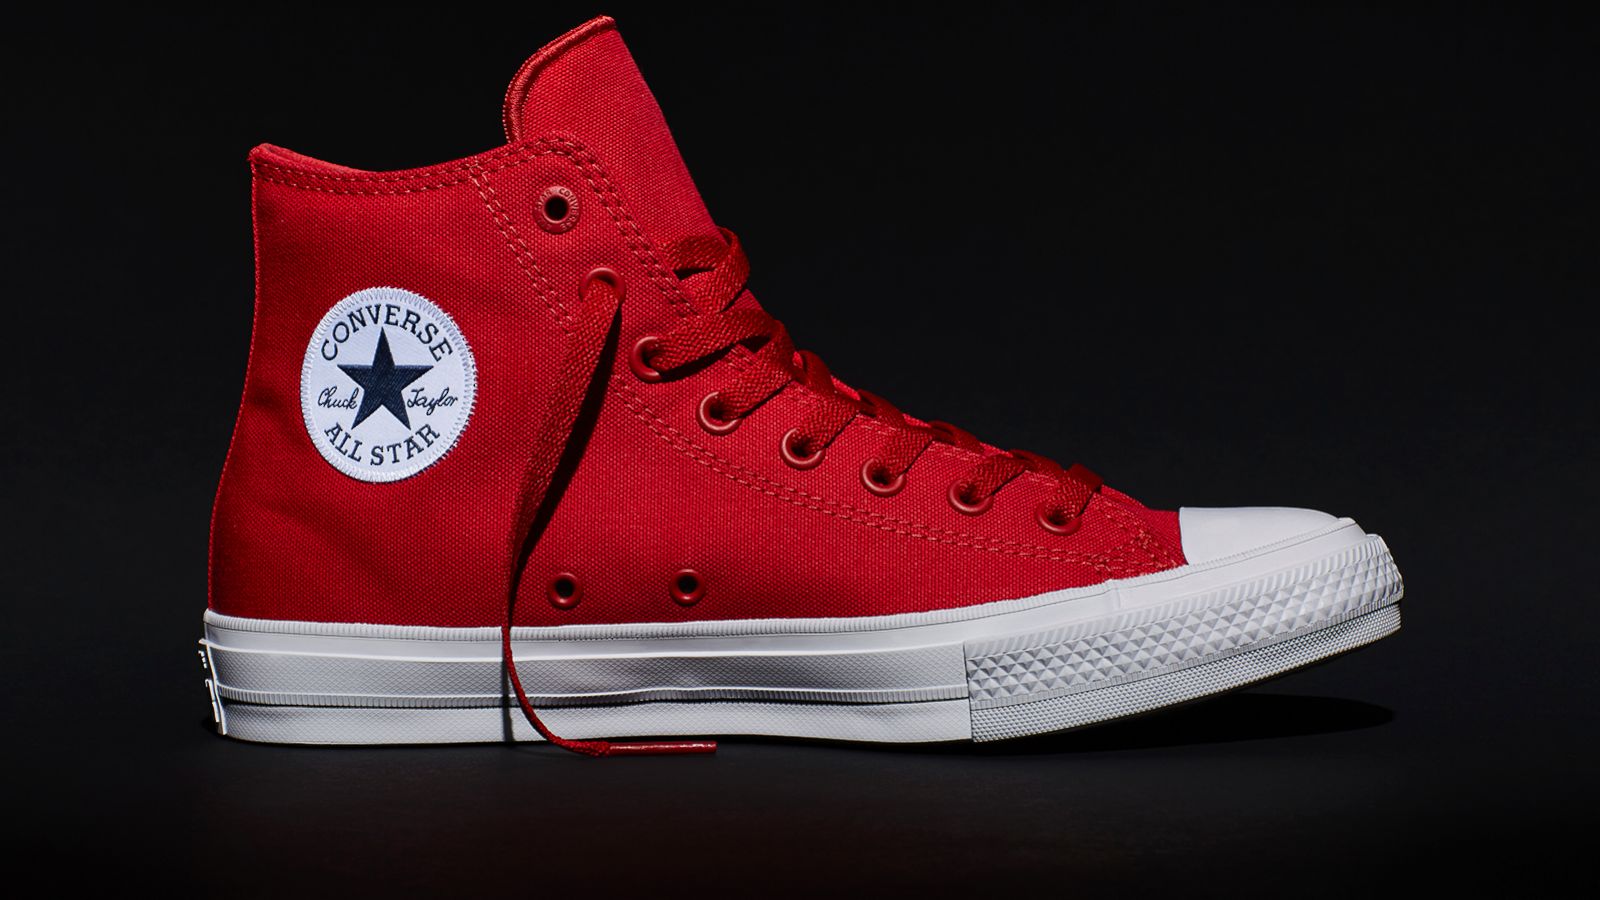 ayudante transacción Resplandor Converse Chuck Taylors Getting First Update in Nearly 100 Years - ABC News